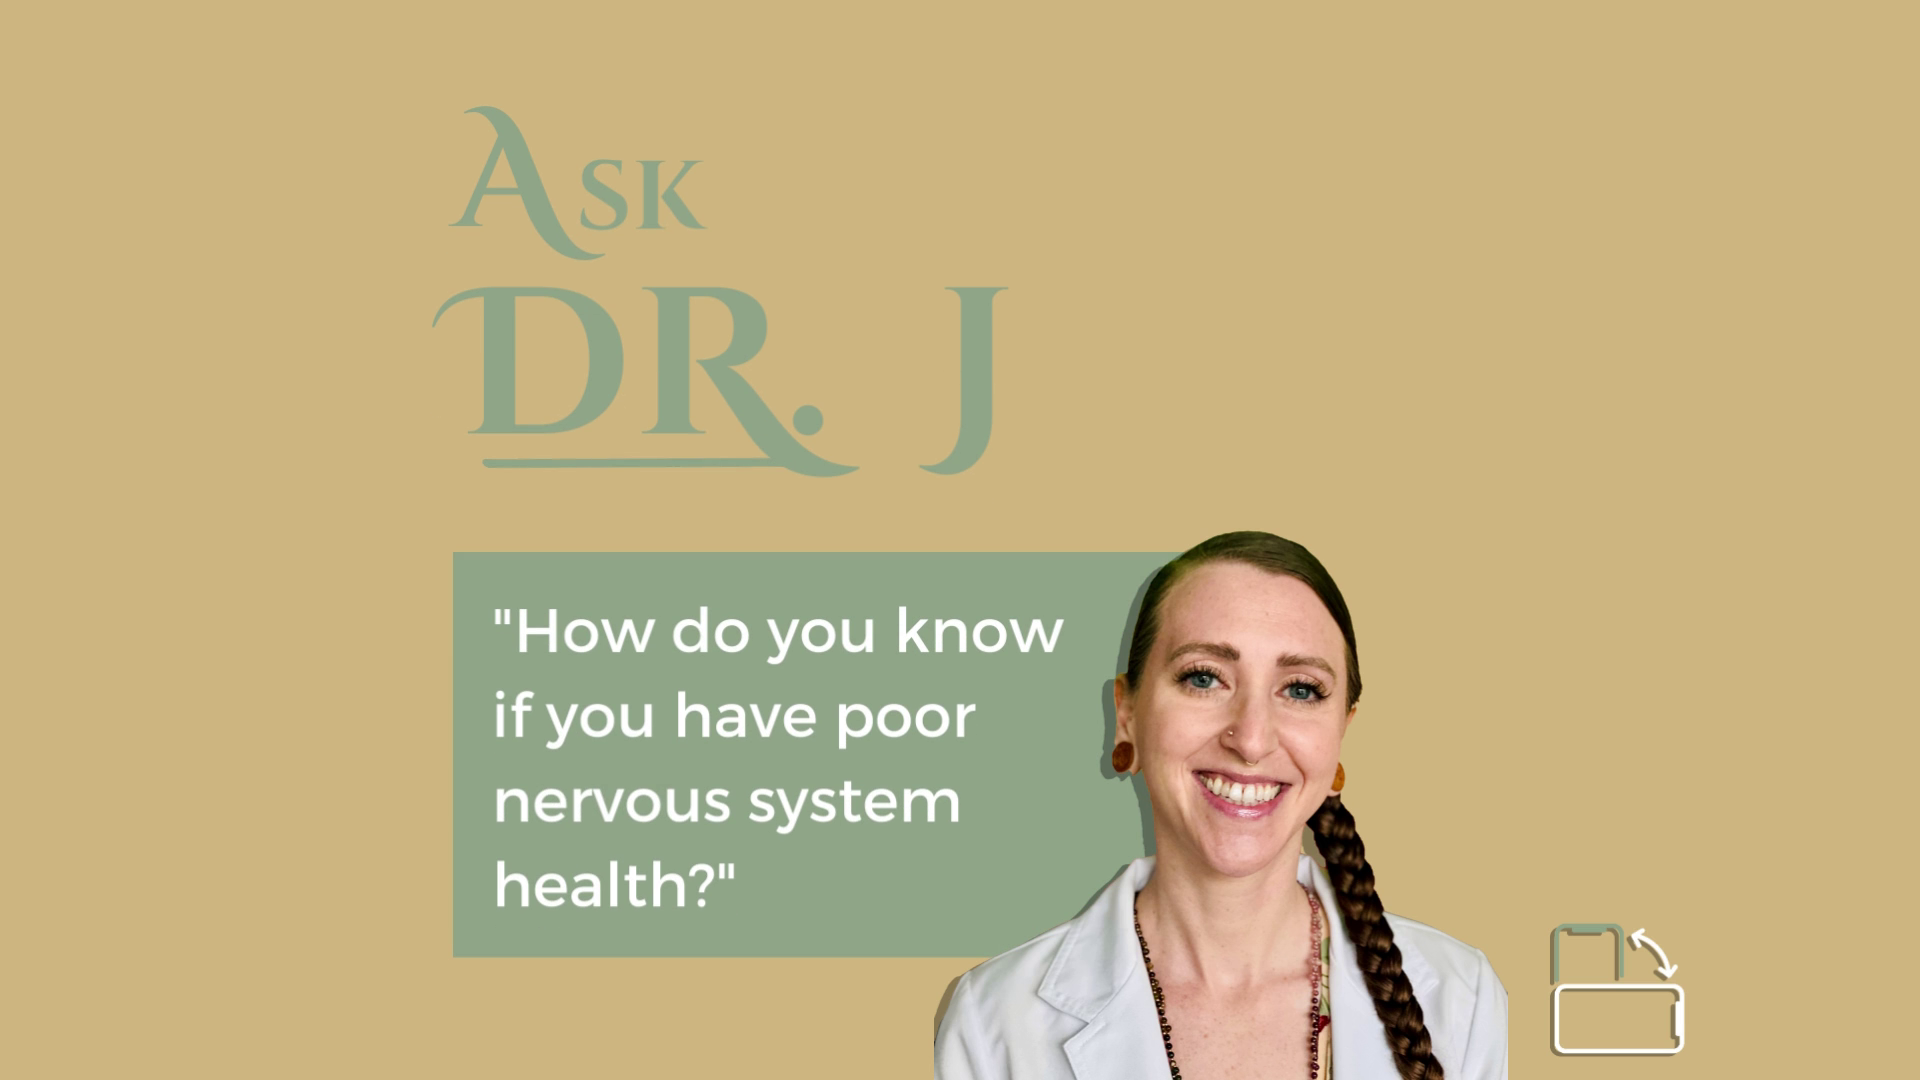 Load video: How do you know if you have poor nervous system health?